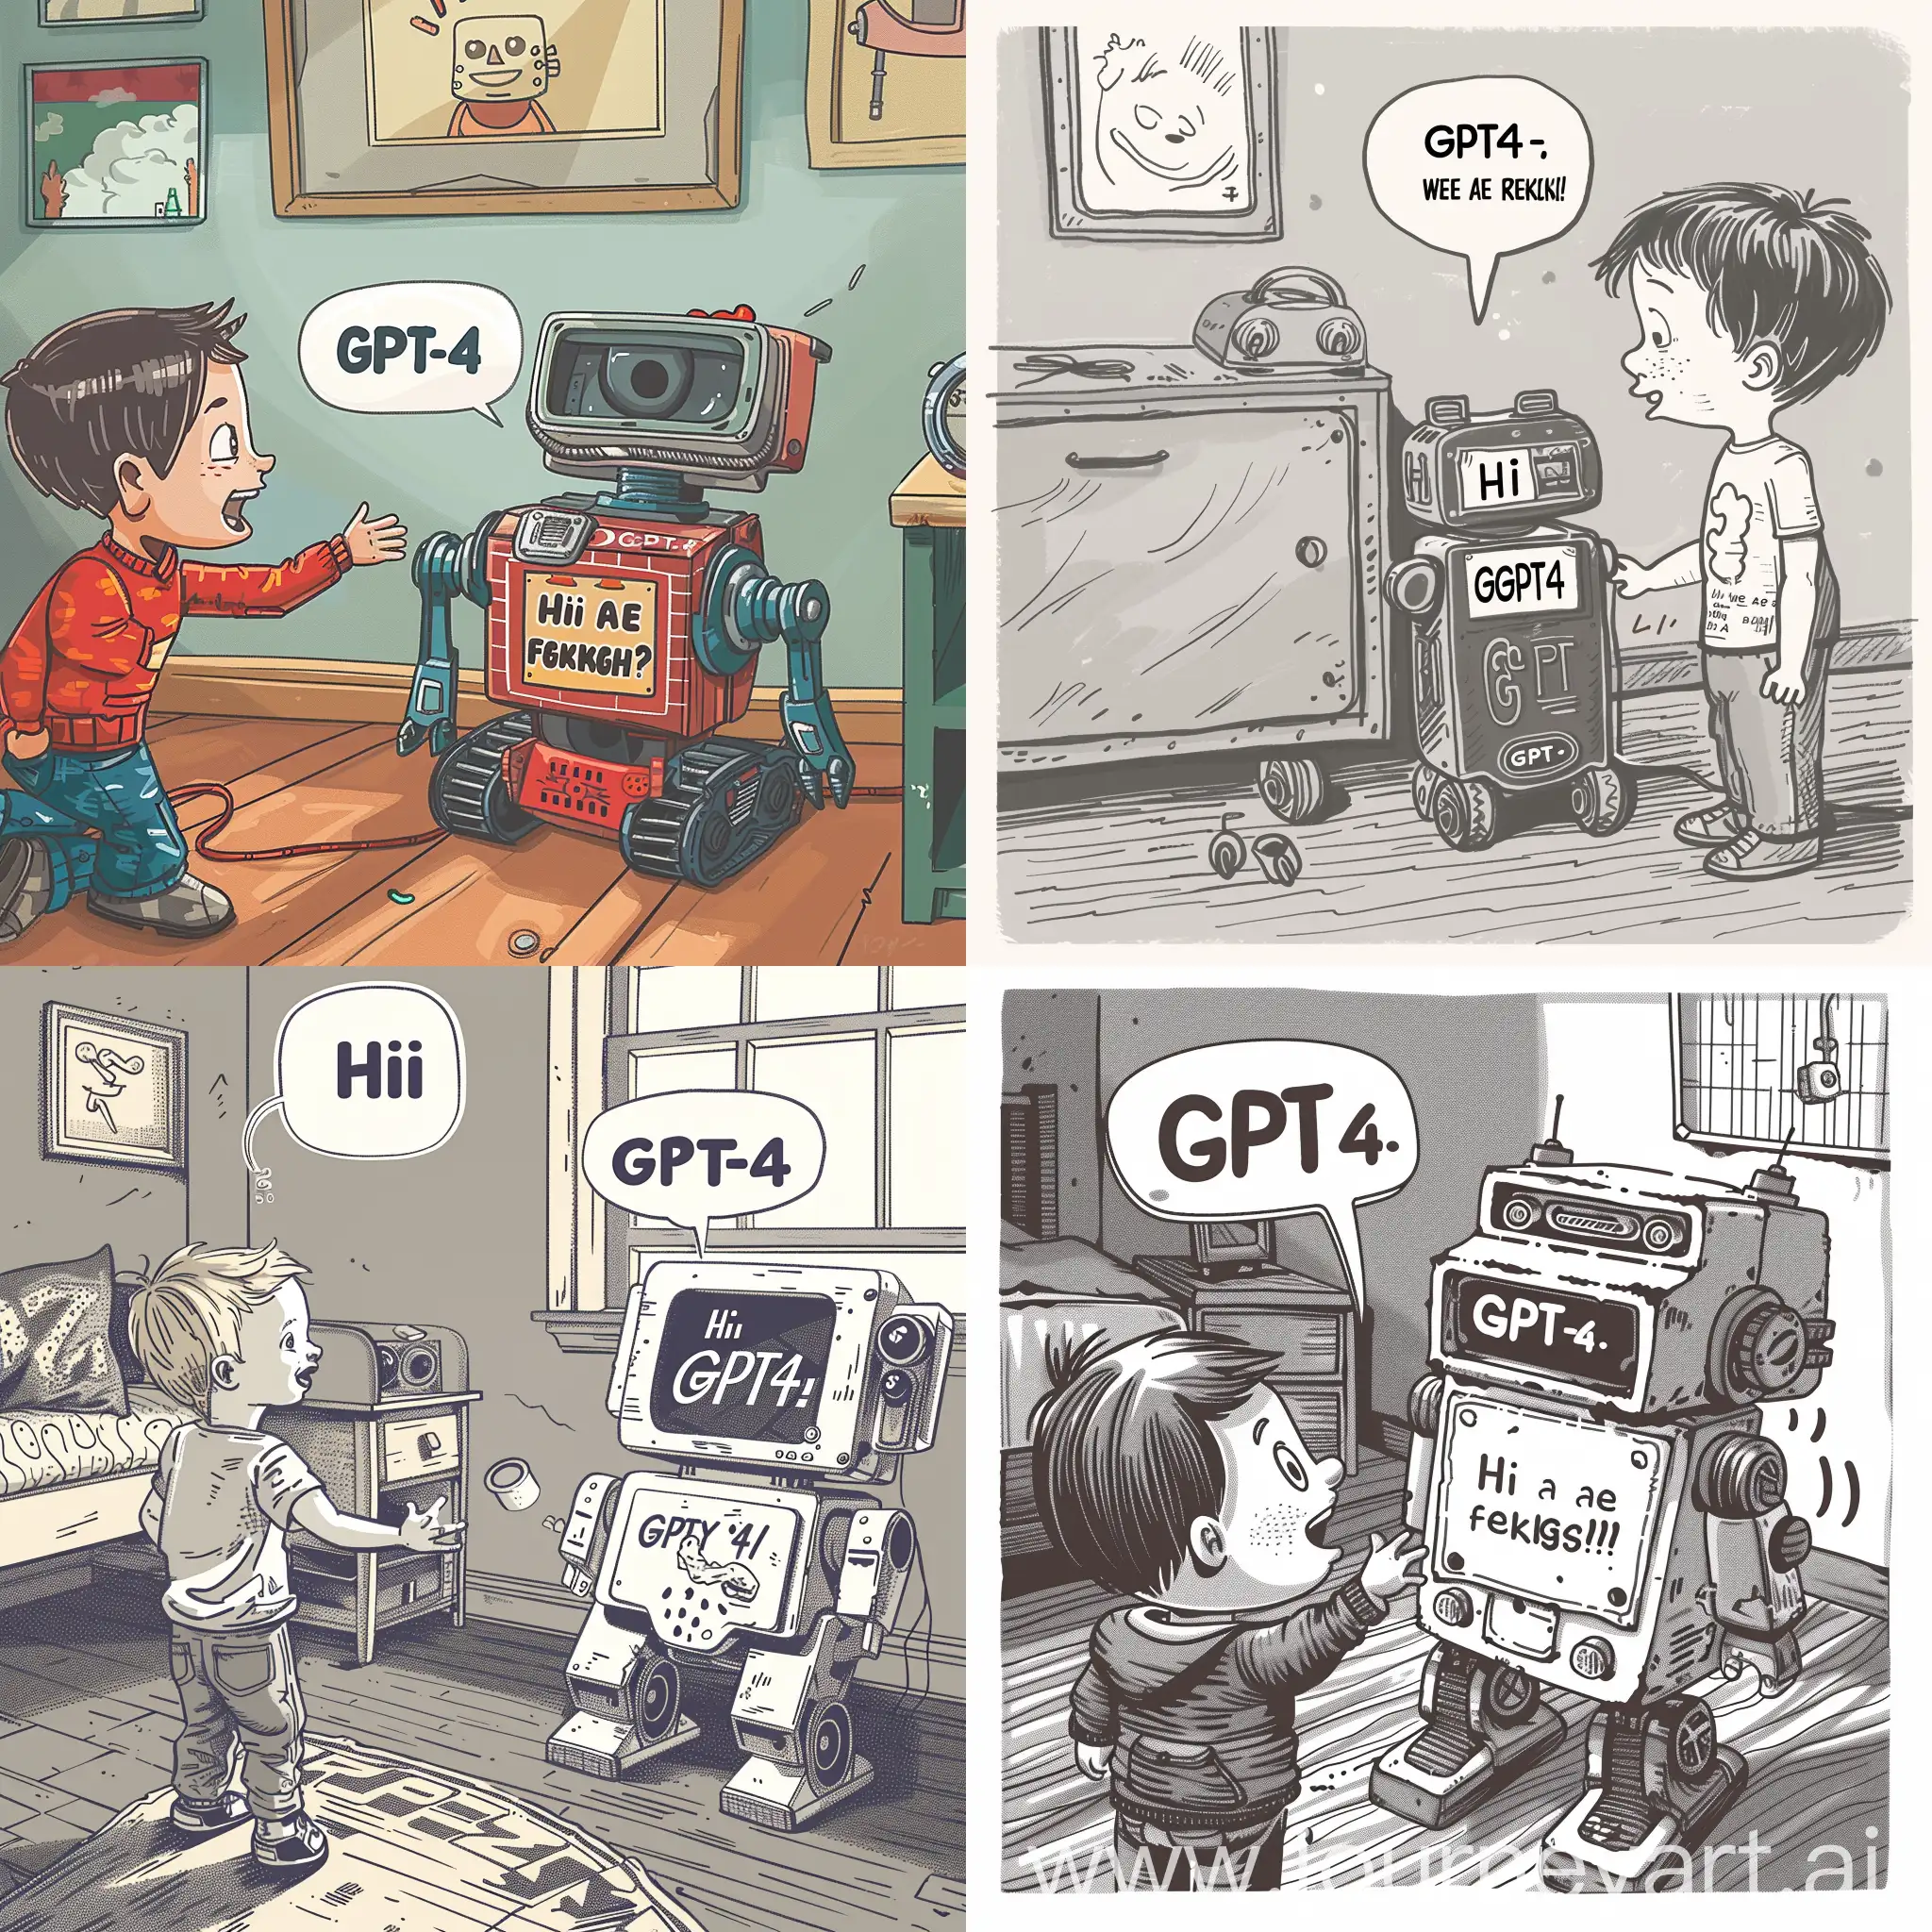 “A child excitedly interacts with a GPT-4 toy robot in an American middle-class child's room, styled as a simple yet cozy setting. The robot, clearly labeled 'GPT-4' on a tag, attempts to respond to the child's greeting, 'Hi, we are friends,' with a garbled 'Hi, %&S*#@,' showcasing its initial communication struggles. The scene captures a moment of budding friendship in a newspaper cartoon style, featuring bold lines, simple shading, and expressive characters, reminiscent of classic American comics." Created Using: bold ink lines, newspaper comic style, expressive character design, simple room decor, American middle-class aesthetic, clear dialogue bubbles, vintage toy design, hd quality, natural look